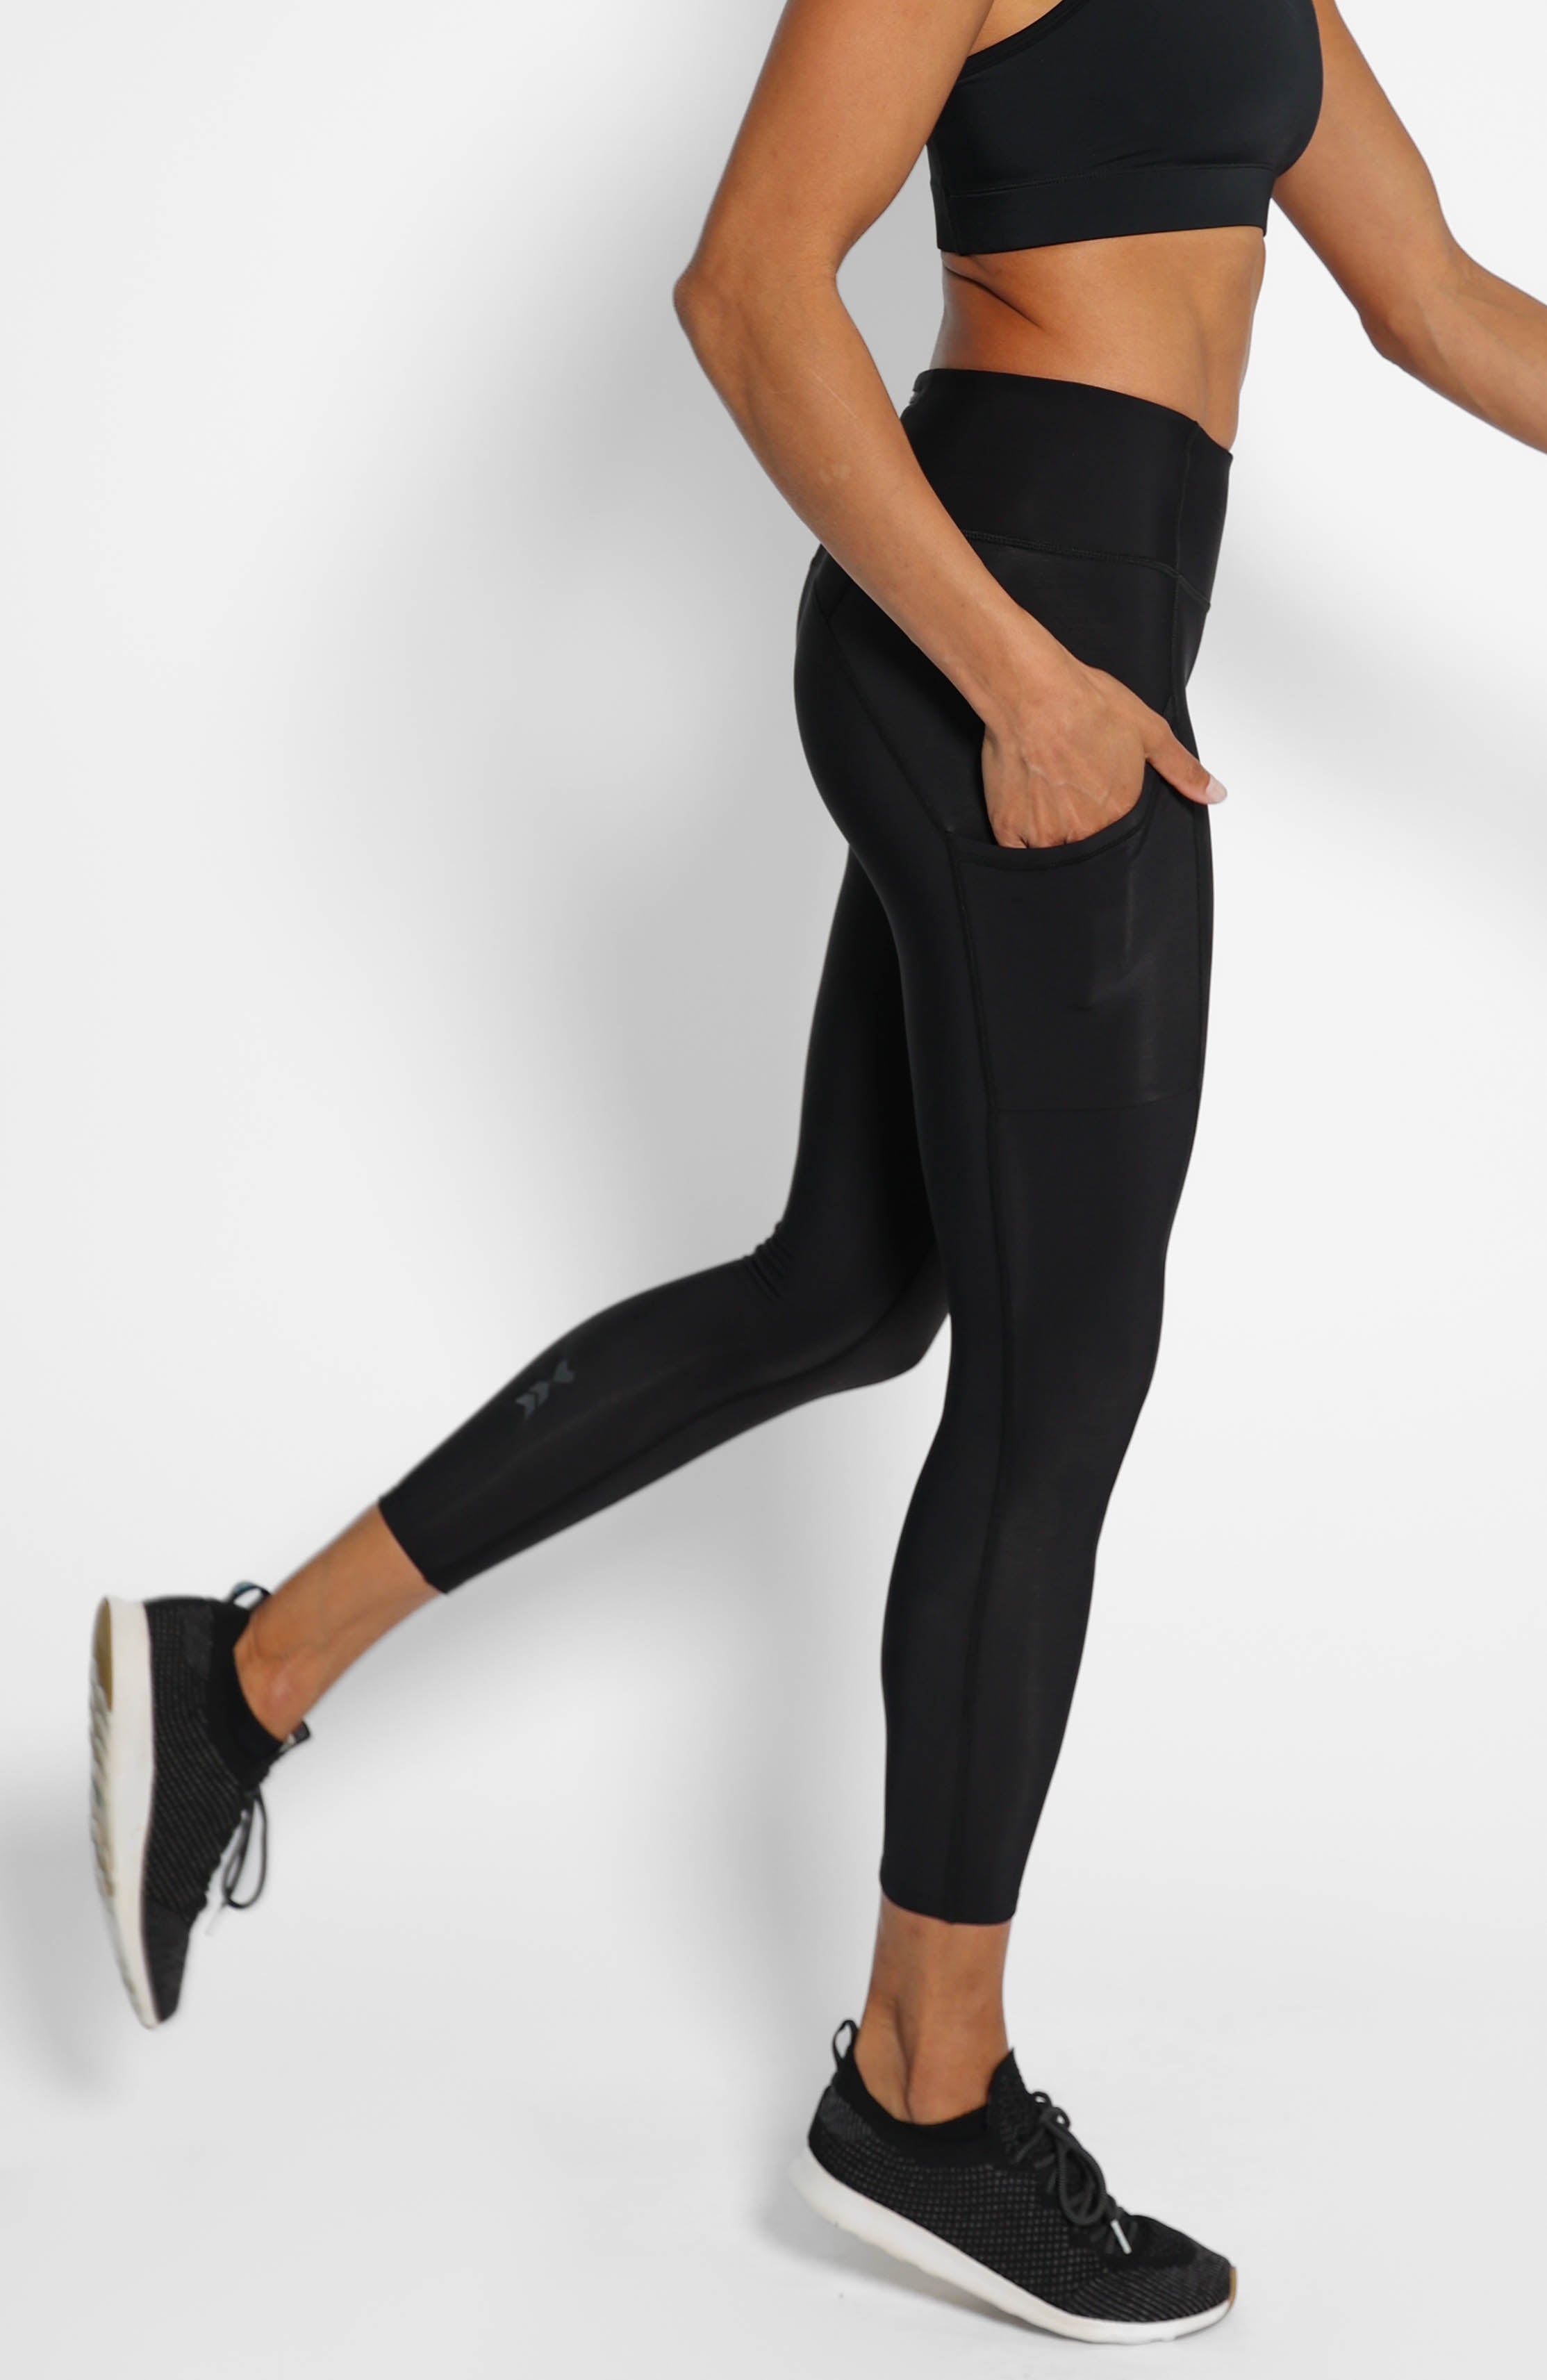  TCA Women's SuperThermal Performance Running Tights/Leggings -  Black Rock, X-Small : Clothing, Shoes & Jewelry